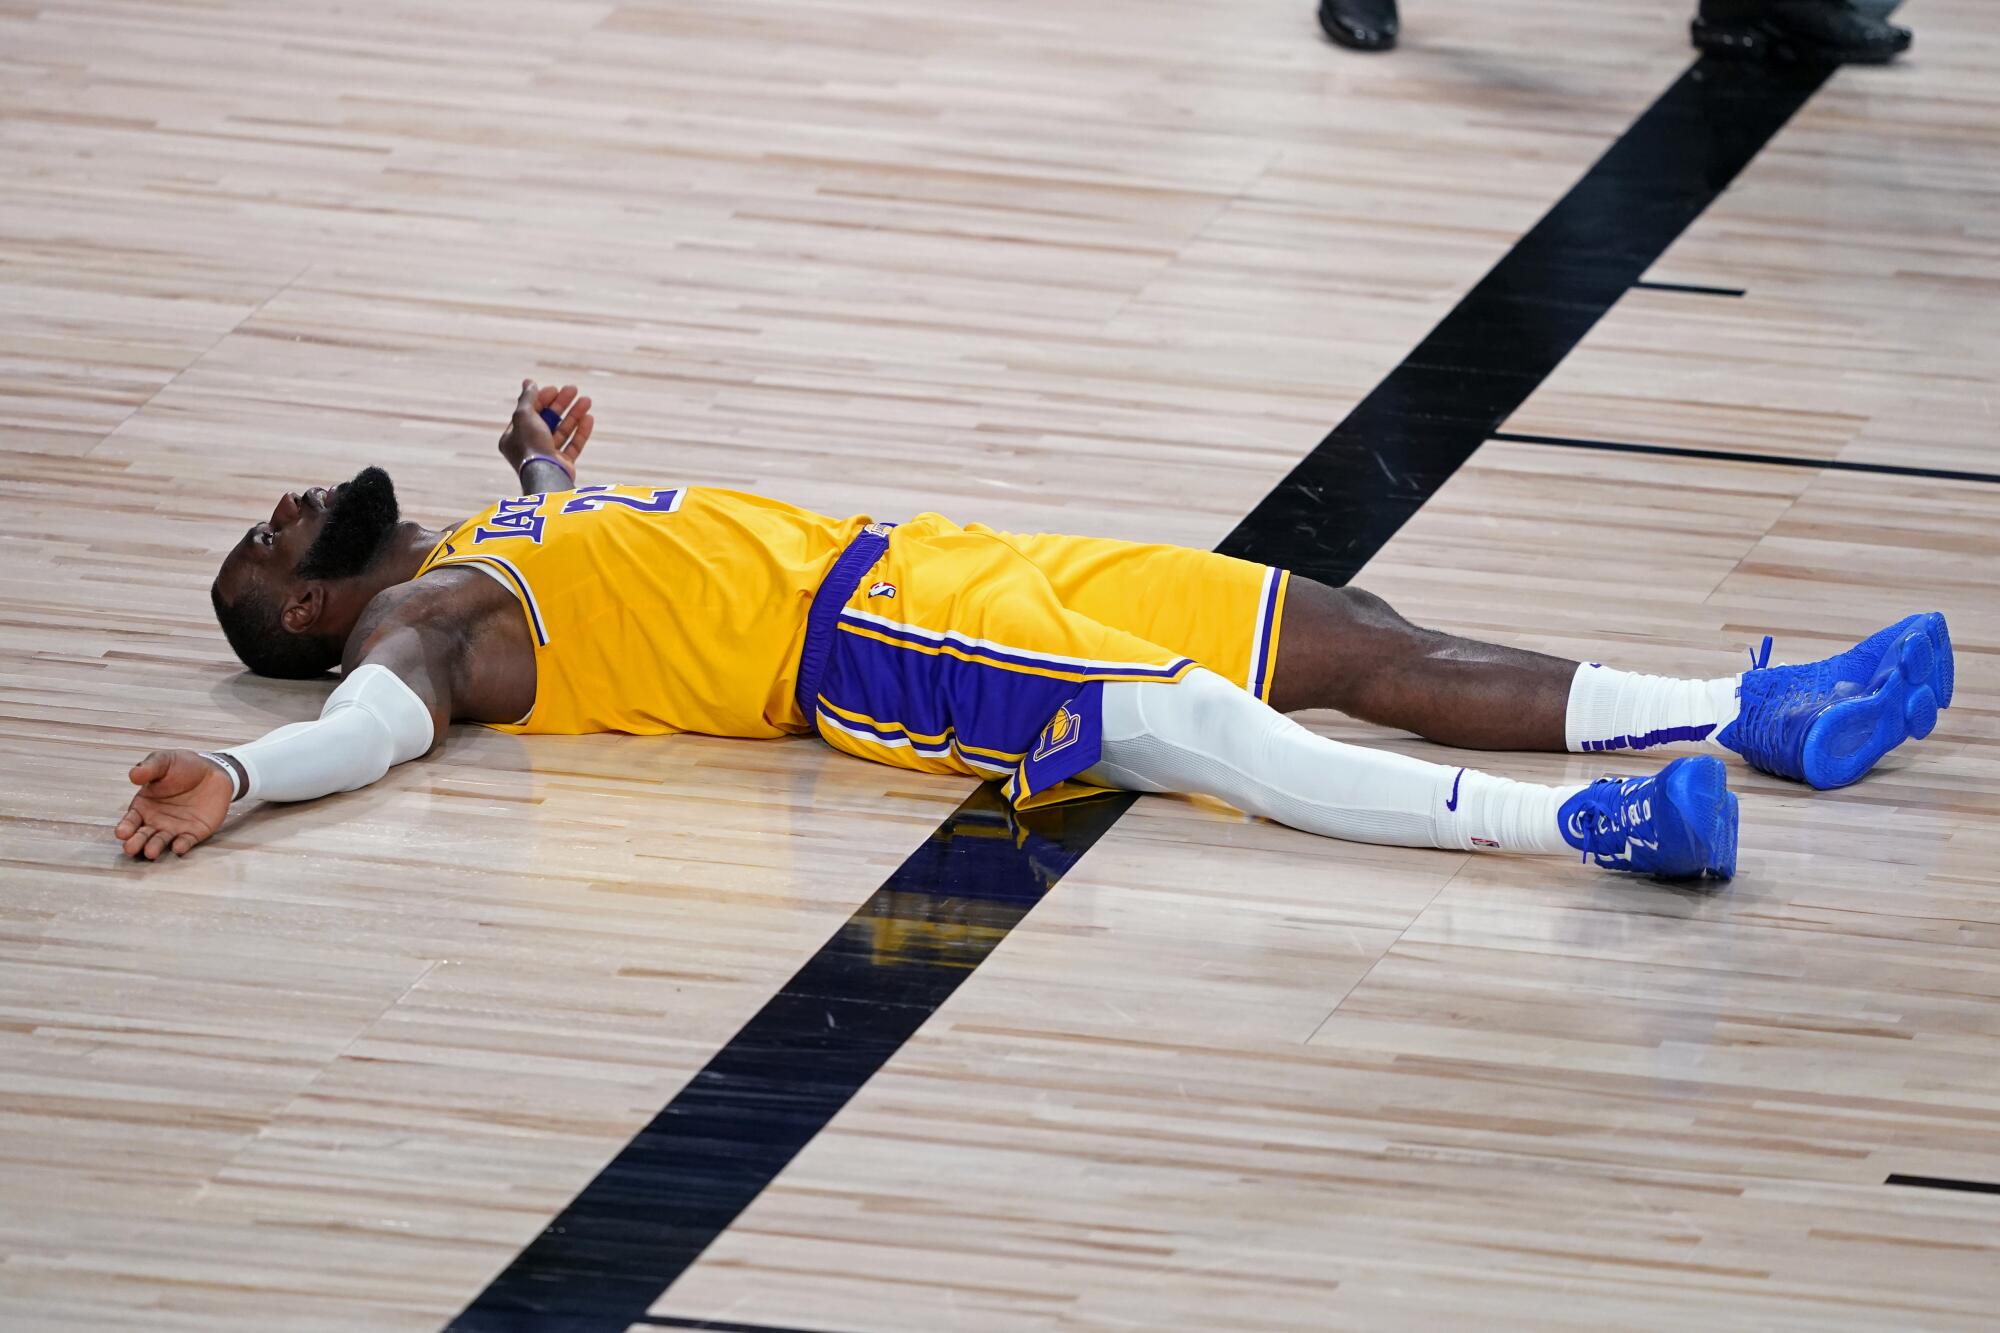 Lakers forward LeBron James lies on the court after committing a foul during the second half.